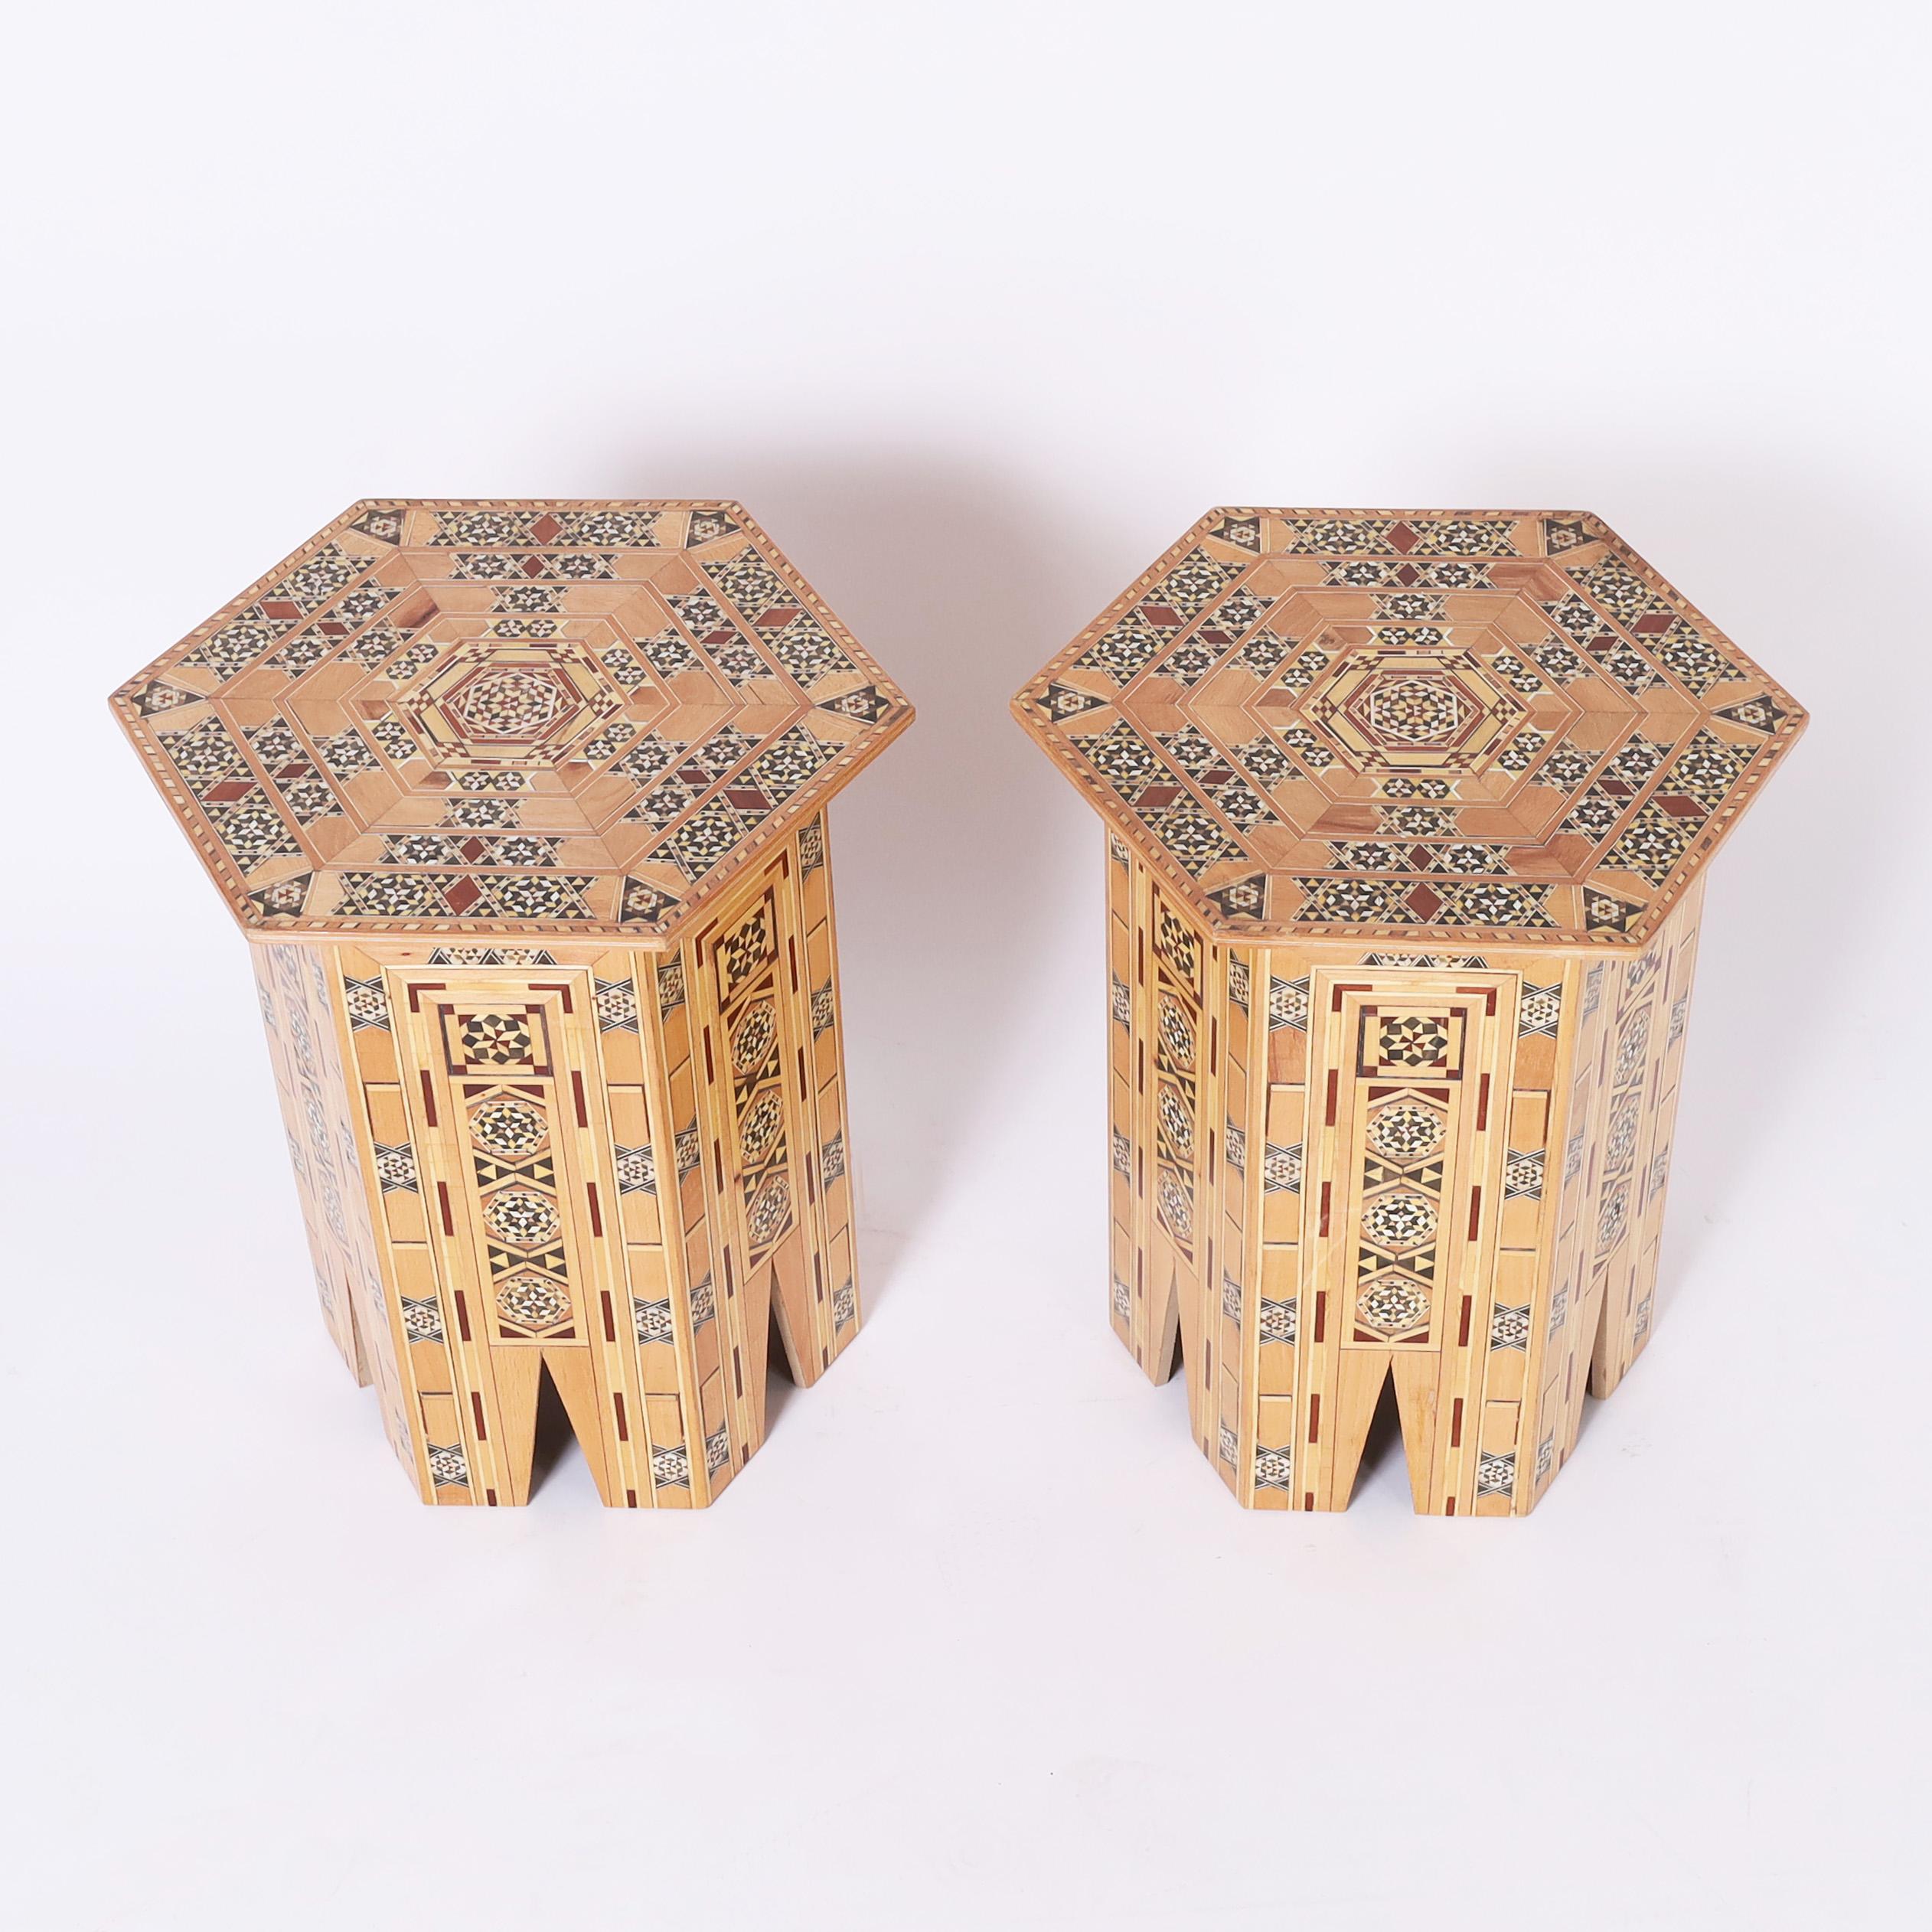 Impressive pair of Moroccan stands with elaborate inlaid geometric marquetry composed of exotic woods such as mahogany, ebony, walnut, whitewood, and yellow poplar over a hexagon form with stylized arches. 